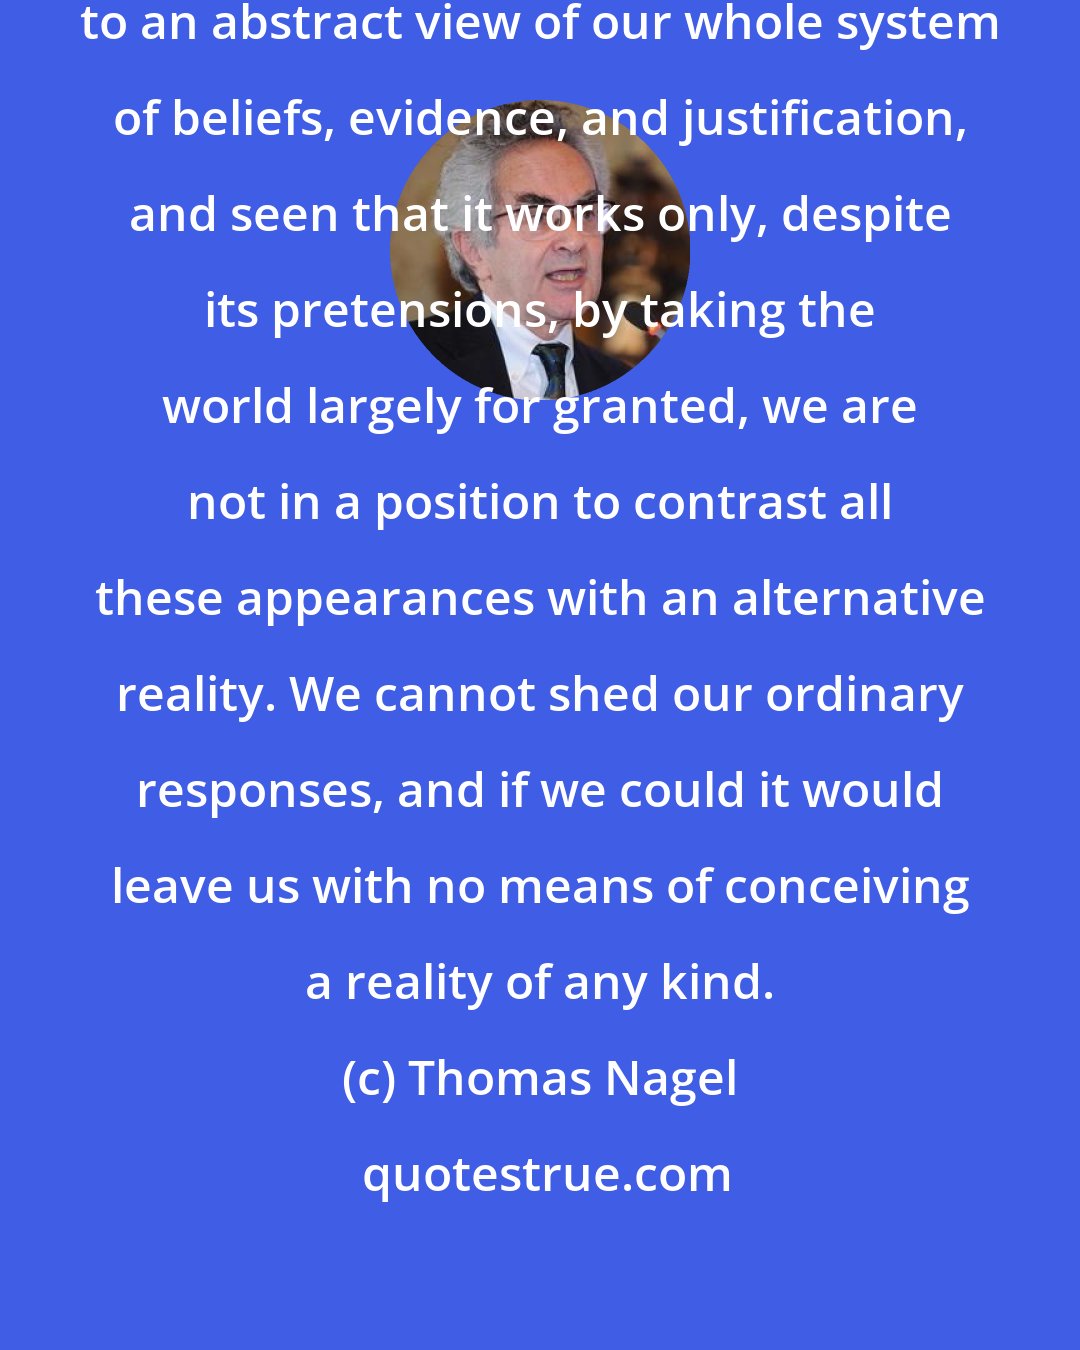 Thomas Nagel: Once we have taken the backward step to an abstract view of our whole system of beliefs, evidence, and justification, and seen that it works only, despite its pretensions, by taking the world largely for granted, we are not in a position to contrast all these appearances with an alternative reality. We cannot shed our ordinary responses, and if we could it would leave us with no means of conceiving a reality of any kind.